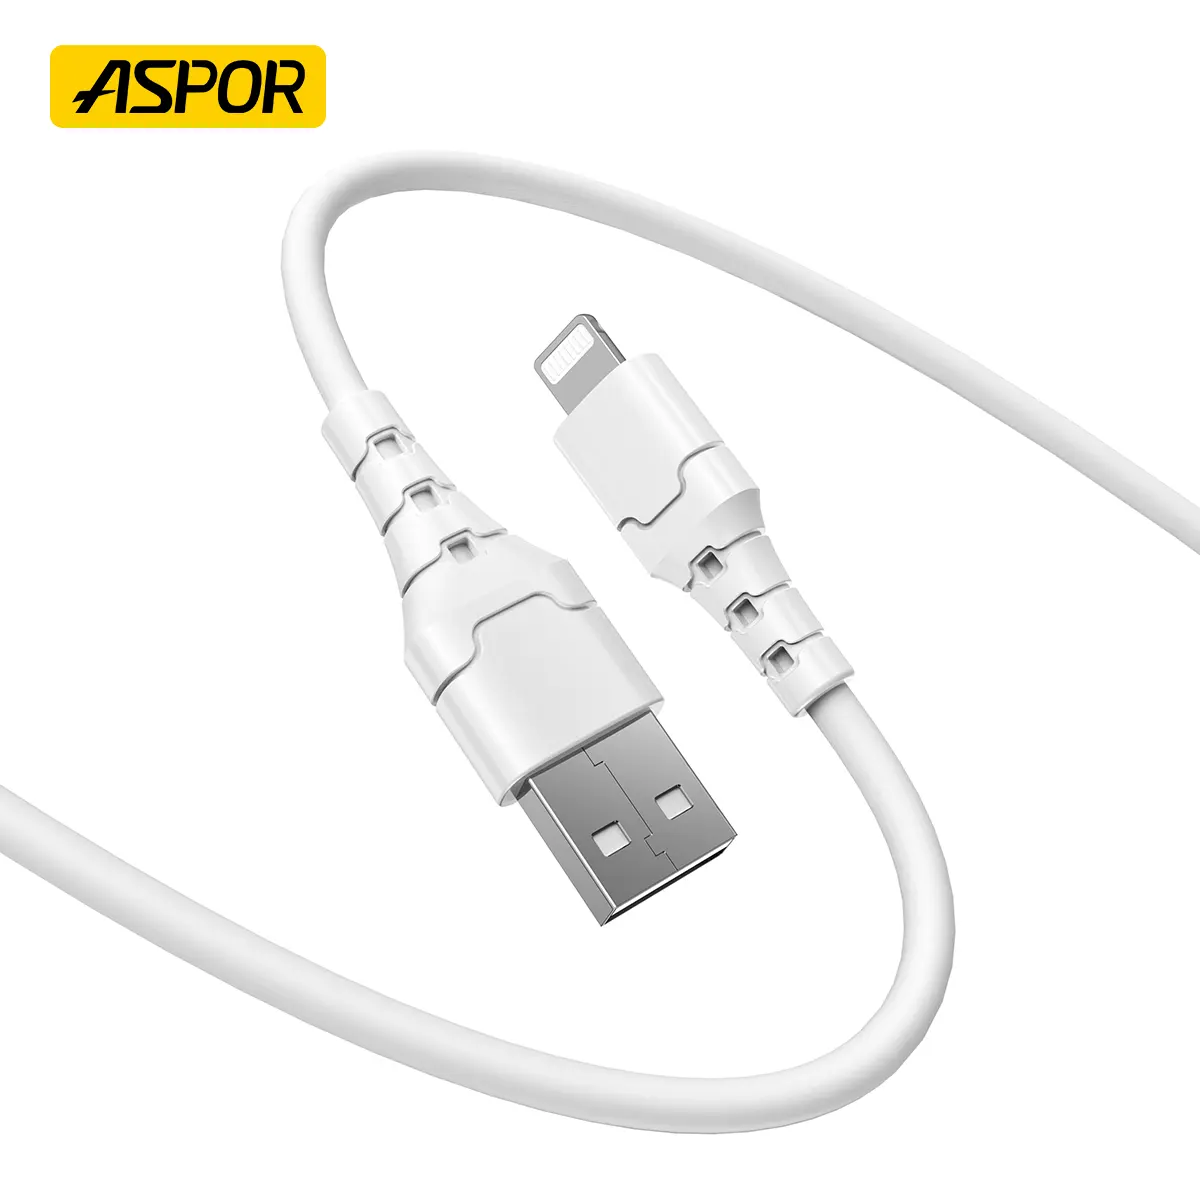 ASPOR A100 fast charging 5a type-c cable for 5v 9v charger 1M data type-c cable for huawei for xiaomi